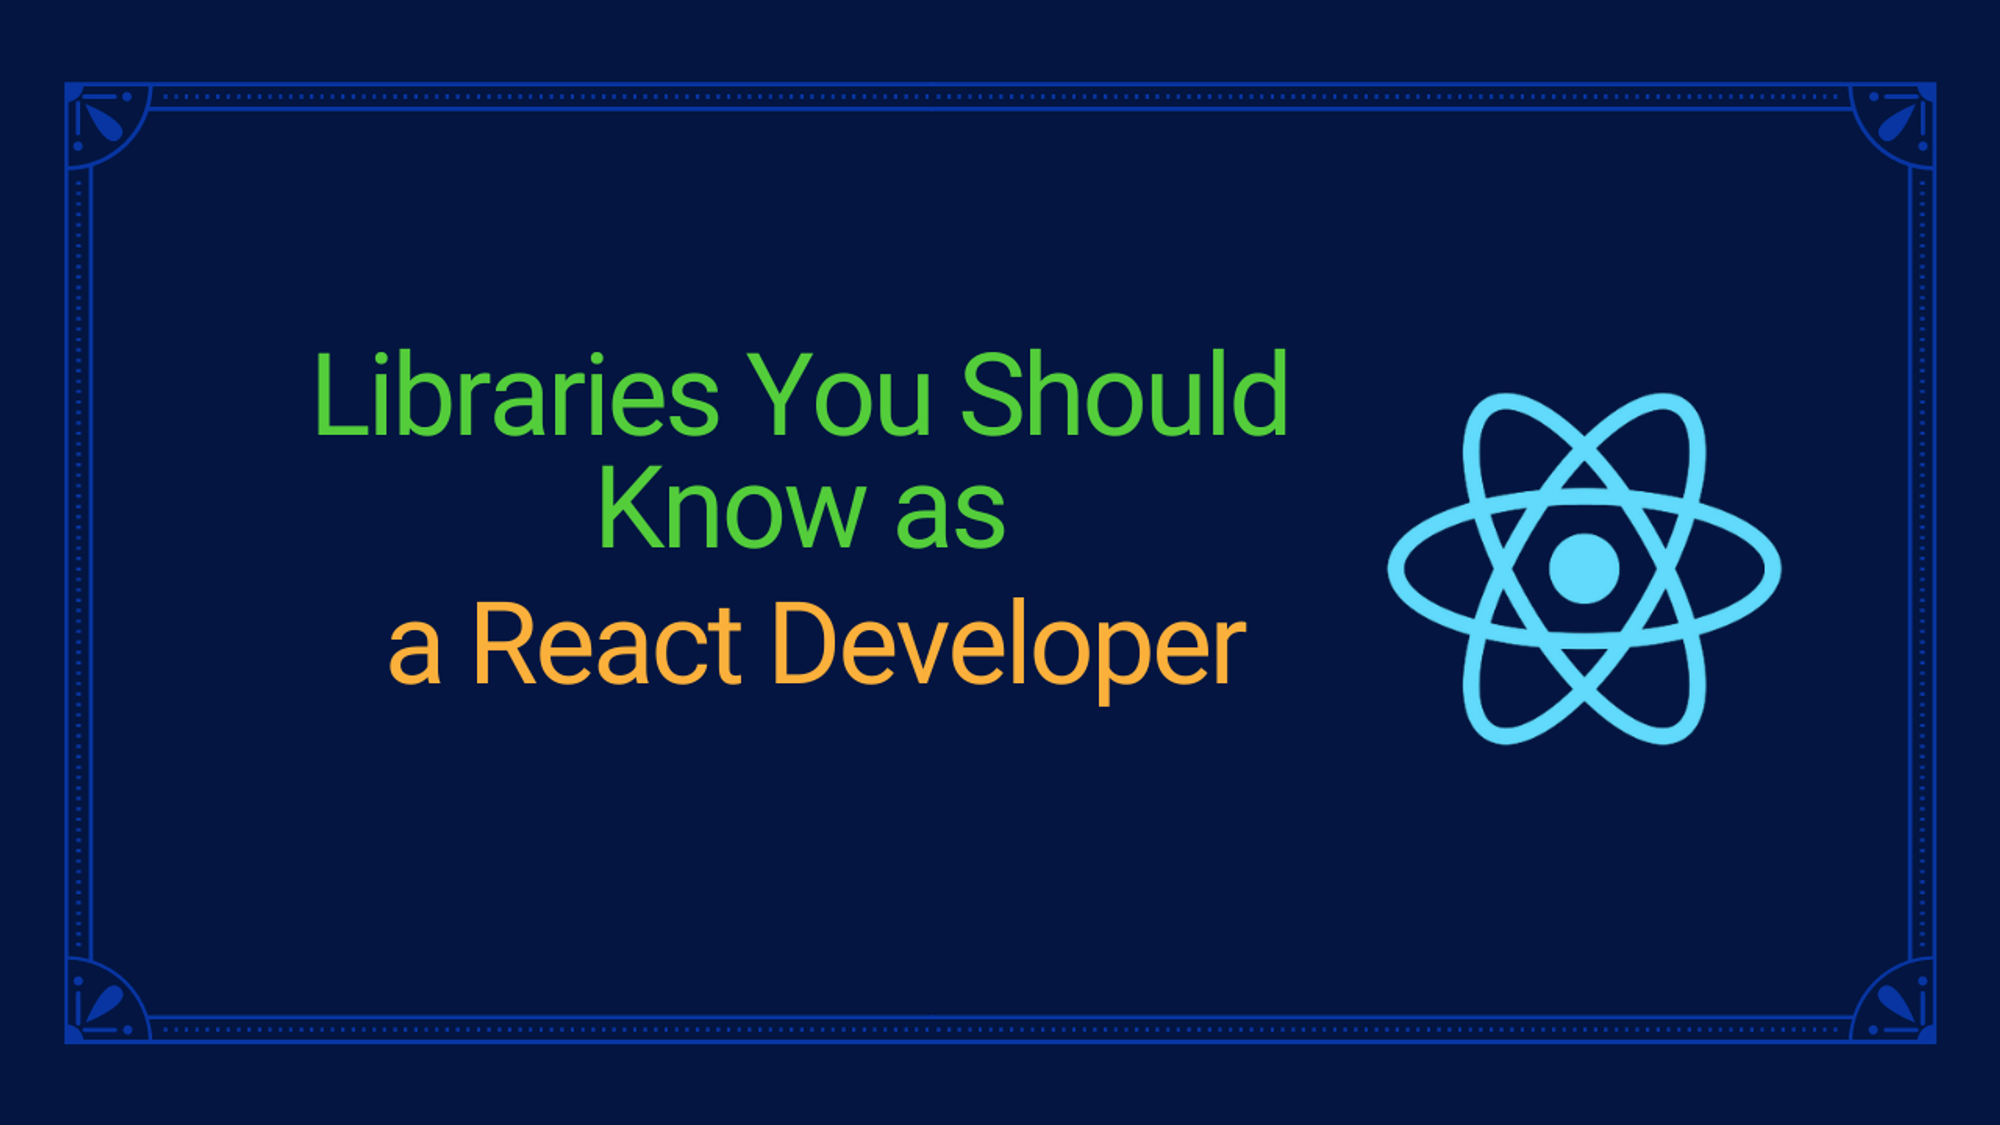 Libraries You Should Know as a React Developer